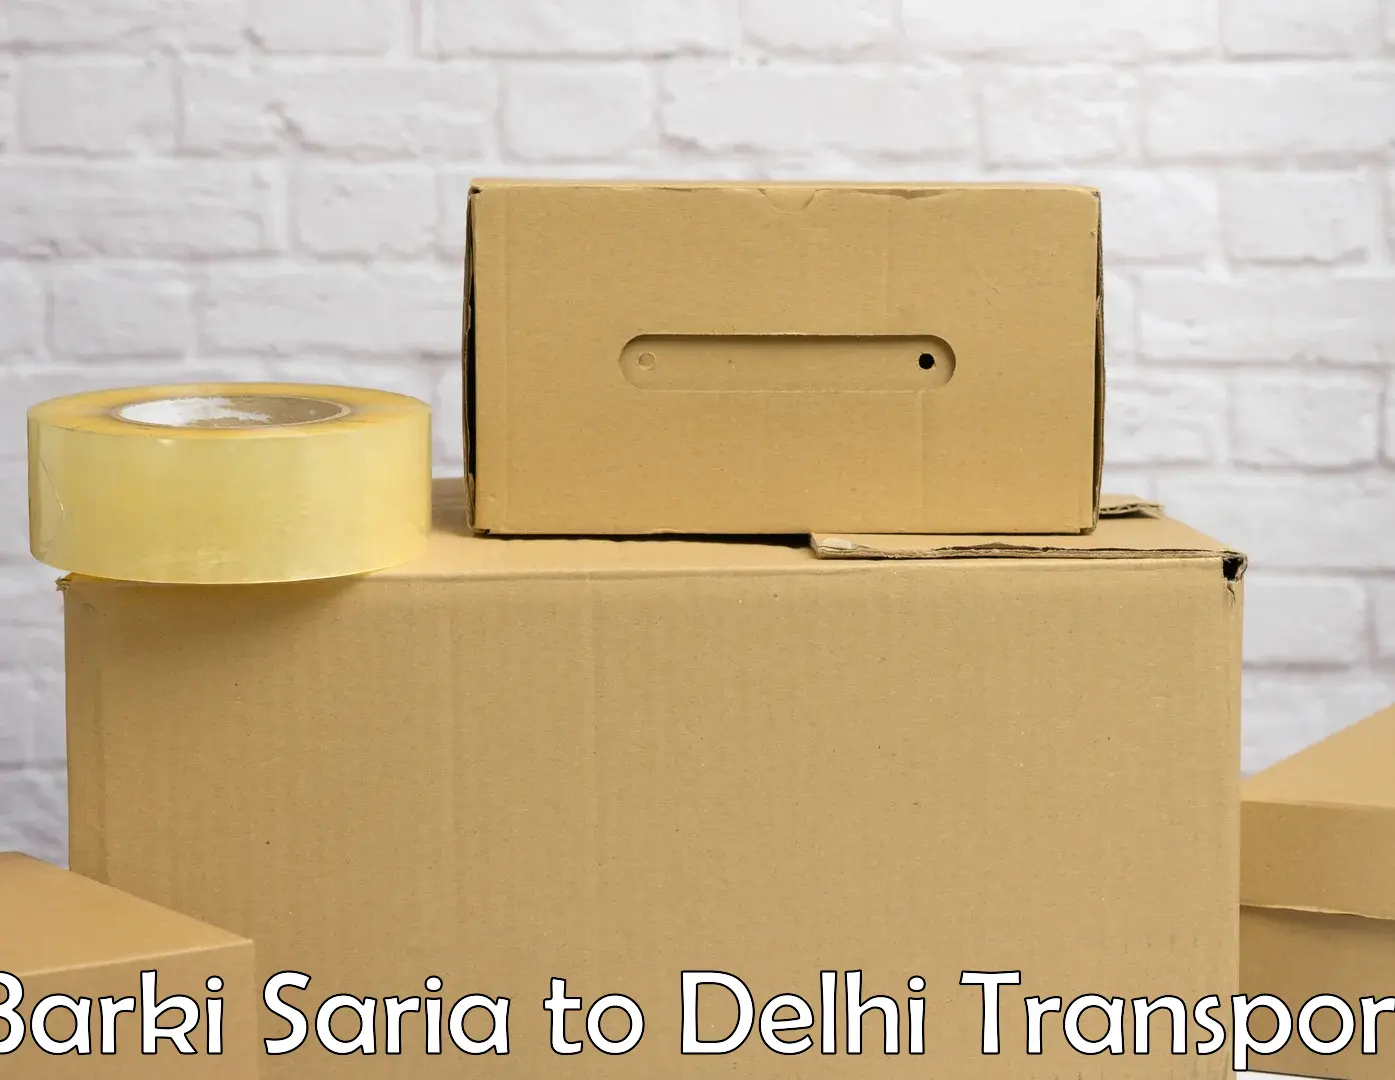 Transport bike from one state to another Barki Saria to Delhi